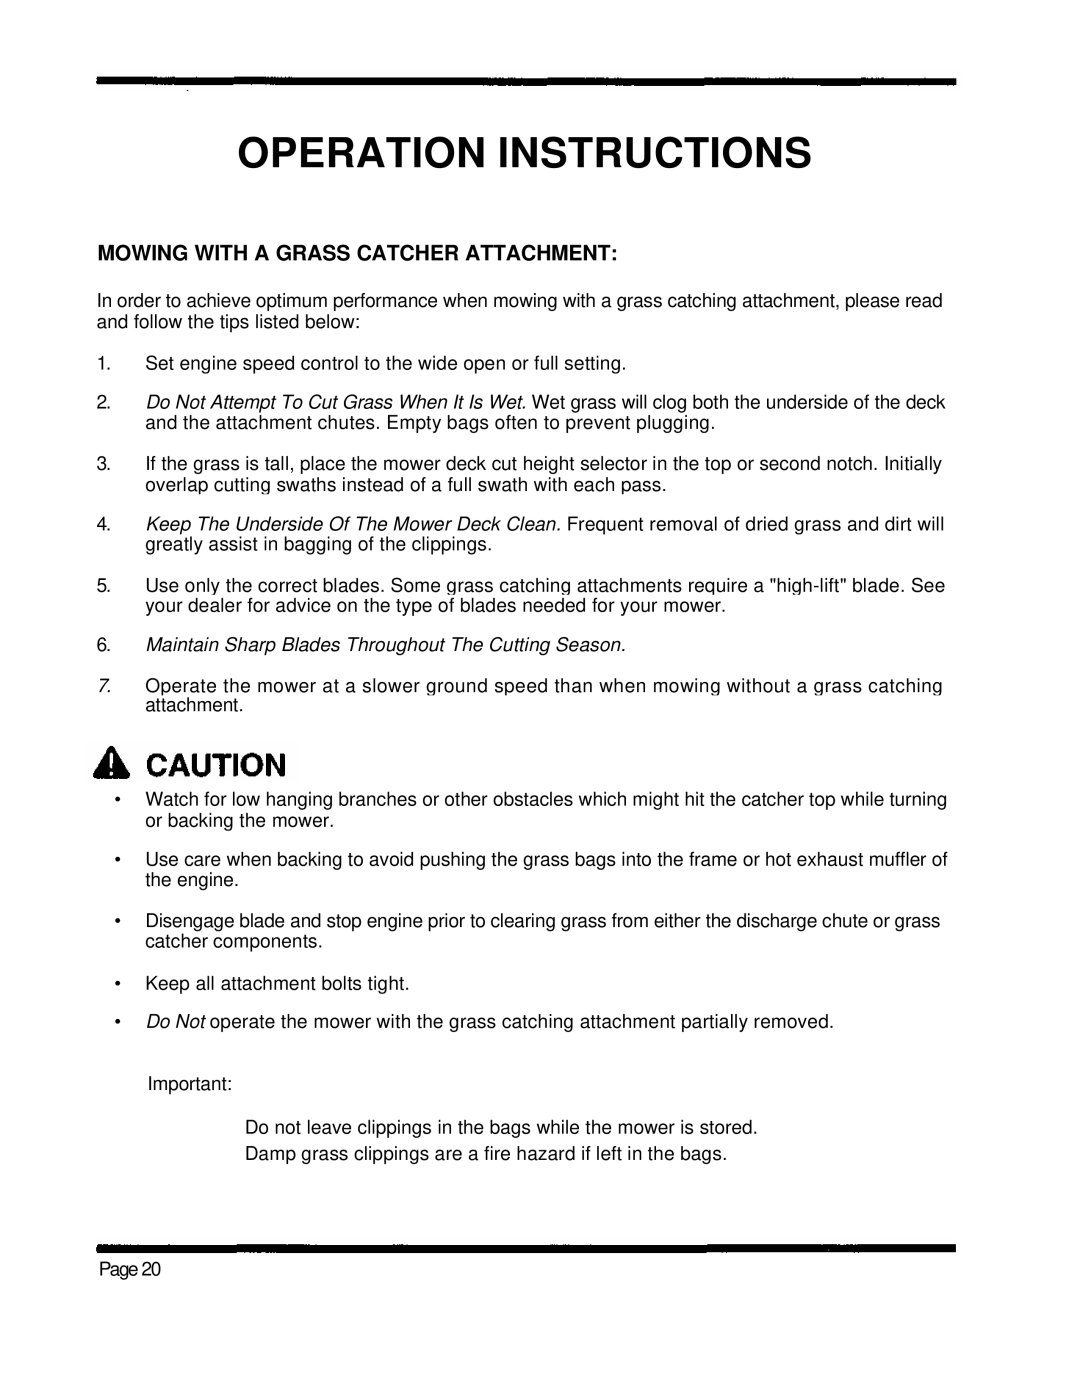 Dixon 5000 Series manual Operation Instructions, Mowing With A Grass Catcher Attachment 